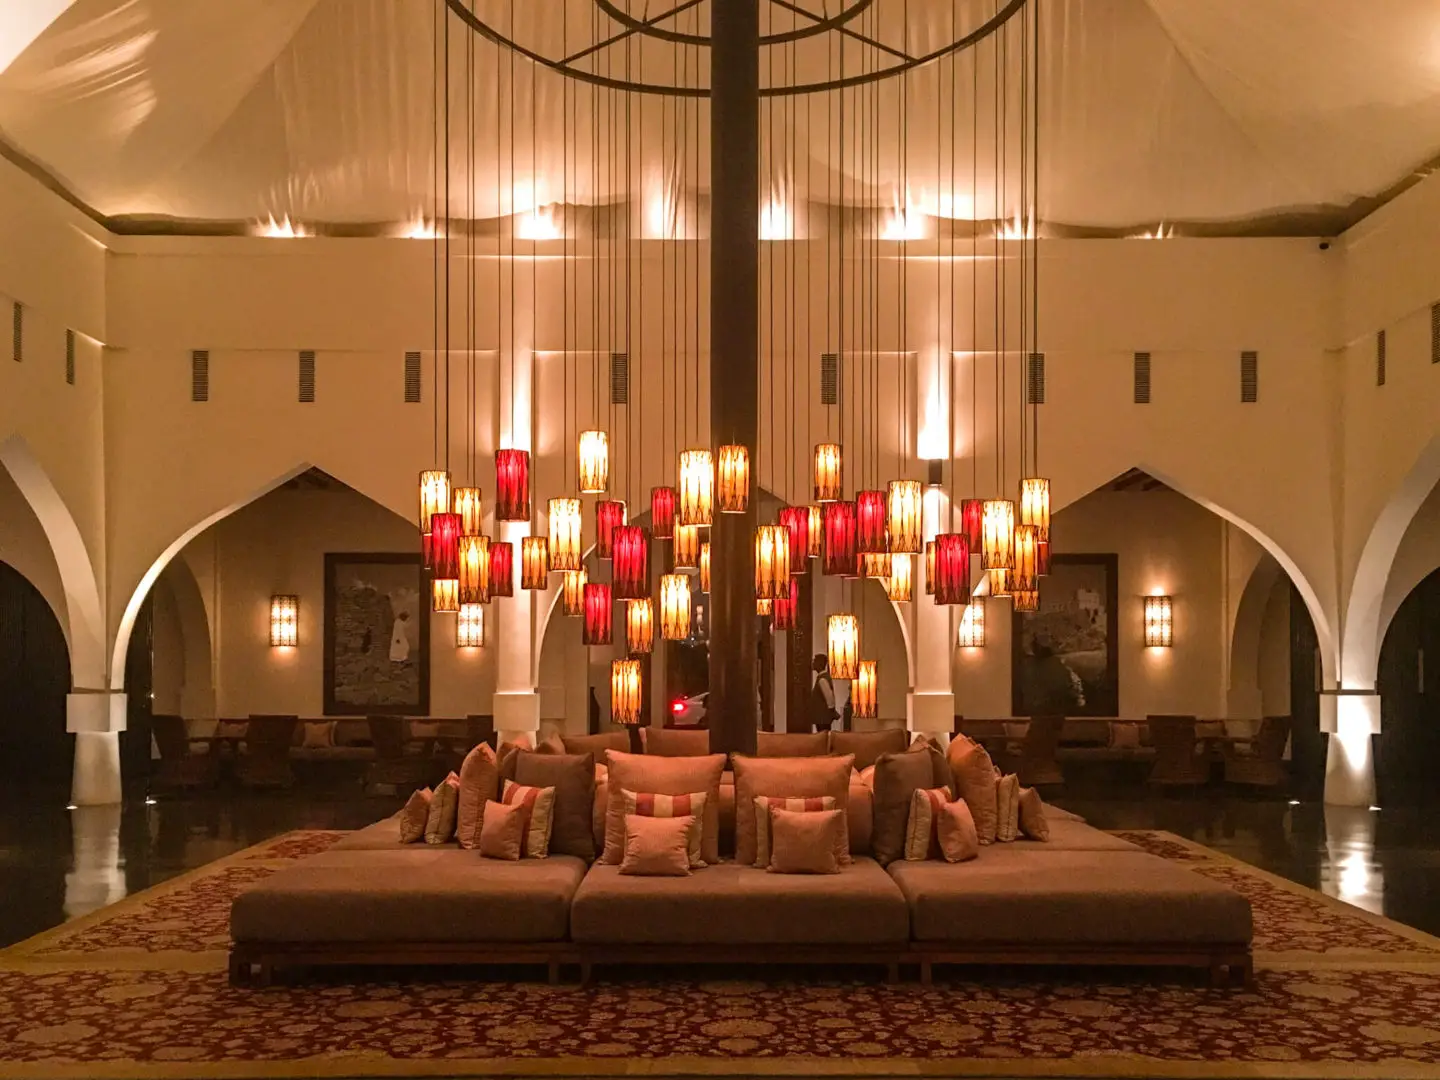 The lobby at the Chedi